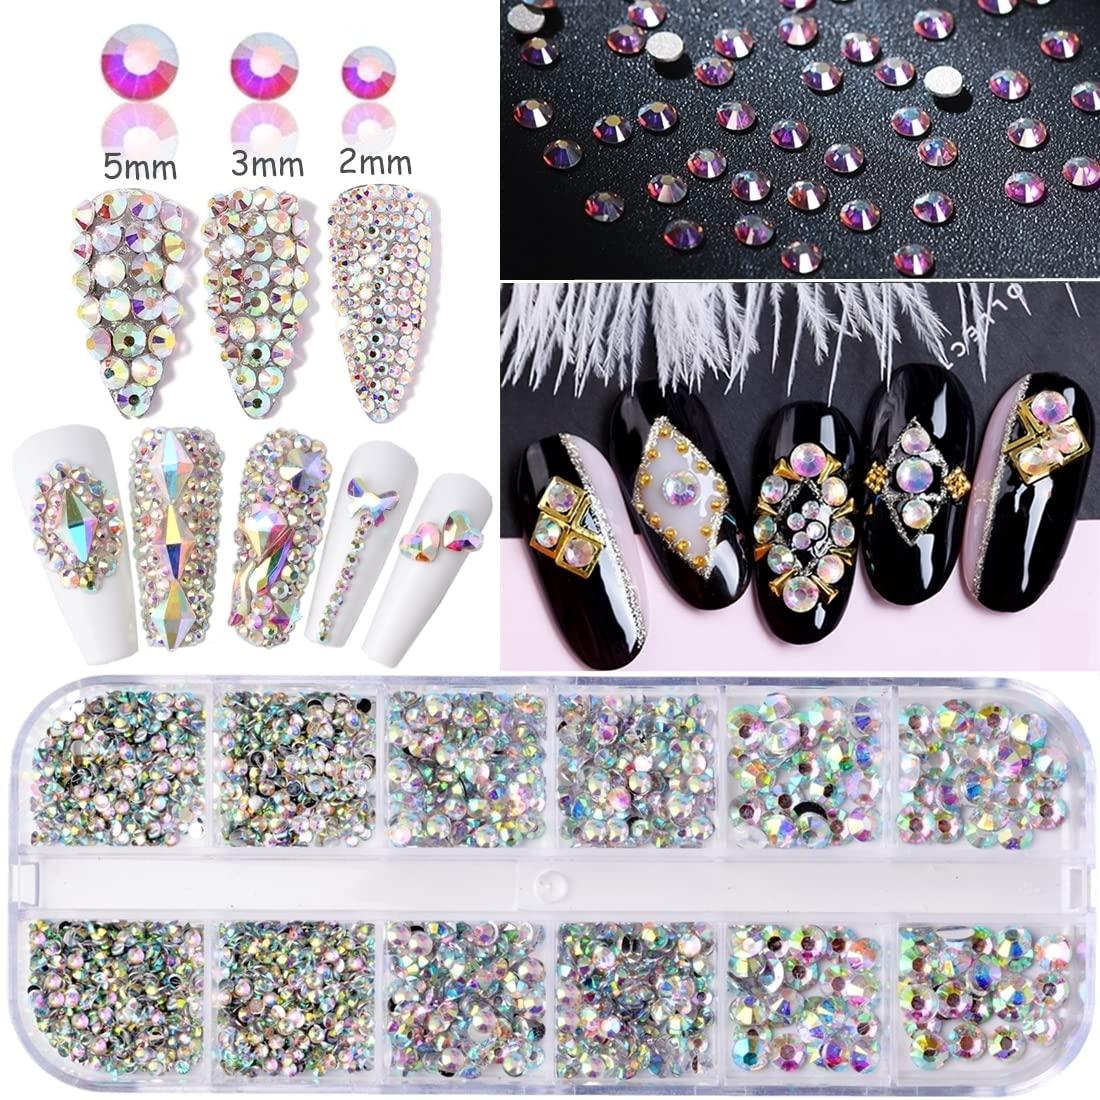 Artdone 9 boxes Nail Rhinestones, Gems, Diamonds, Art Studs, Crystals, Sequins for Nails Kit with 1 Tweezers and 3 Pen